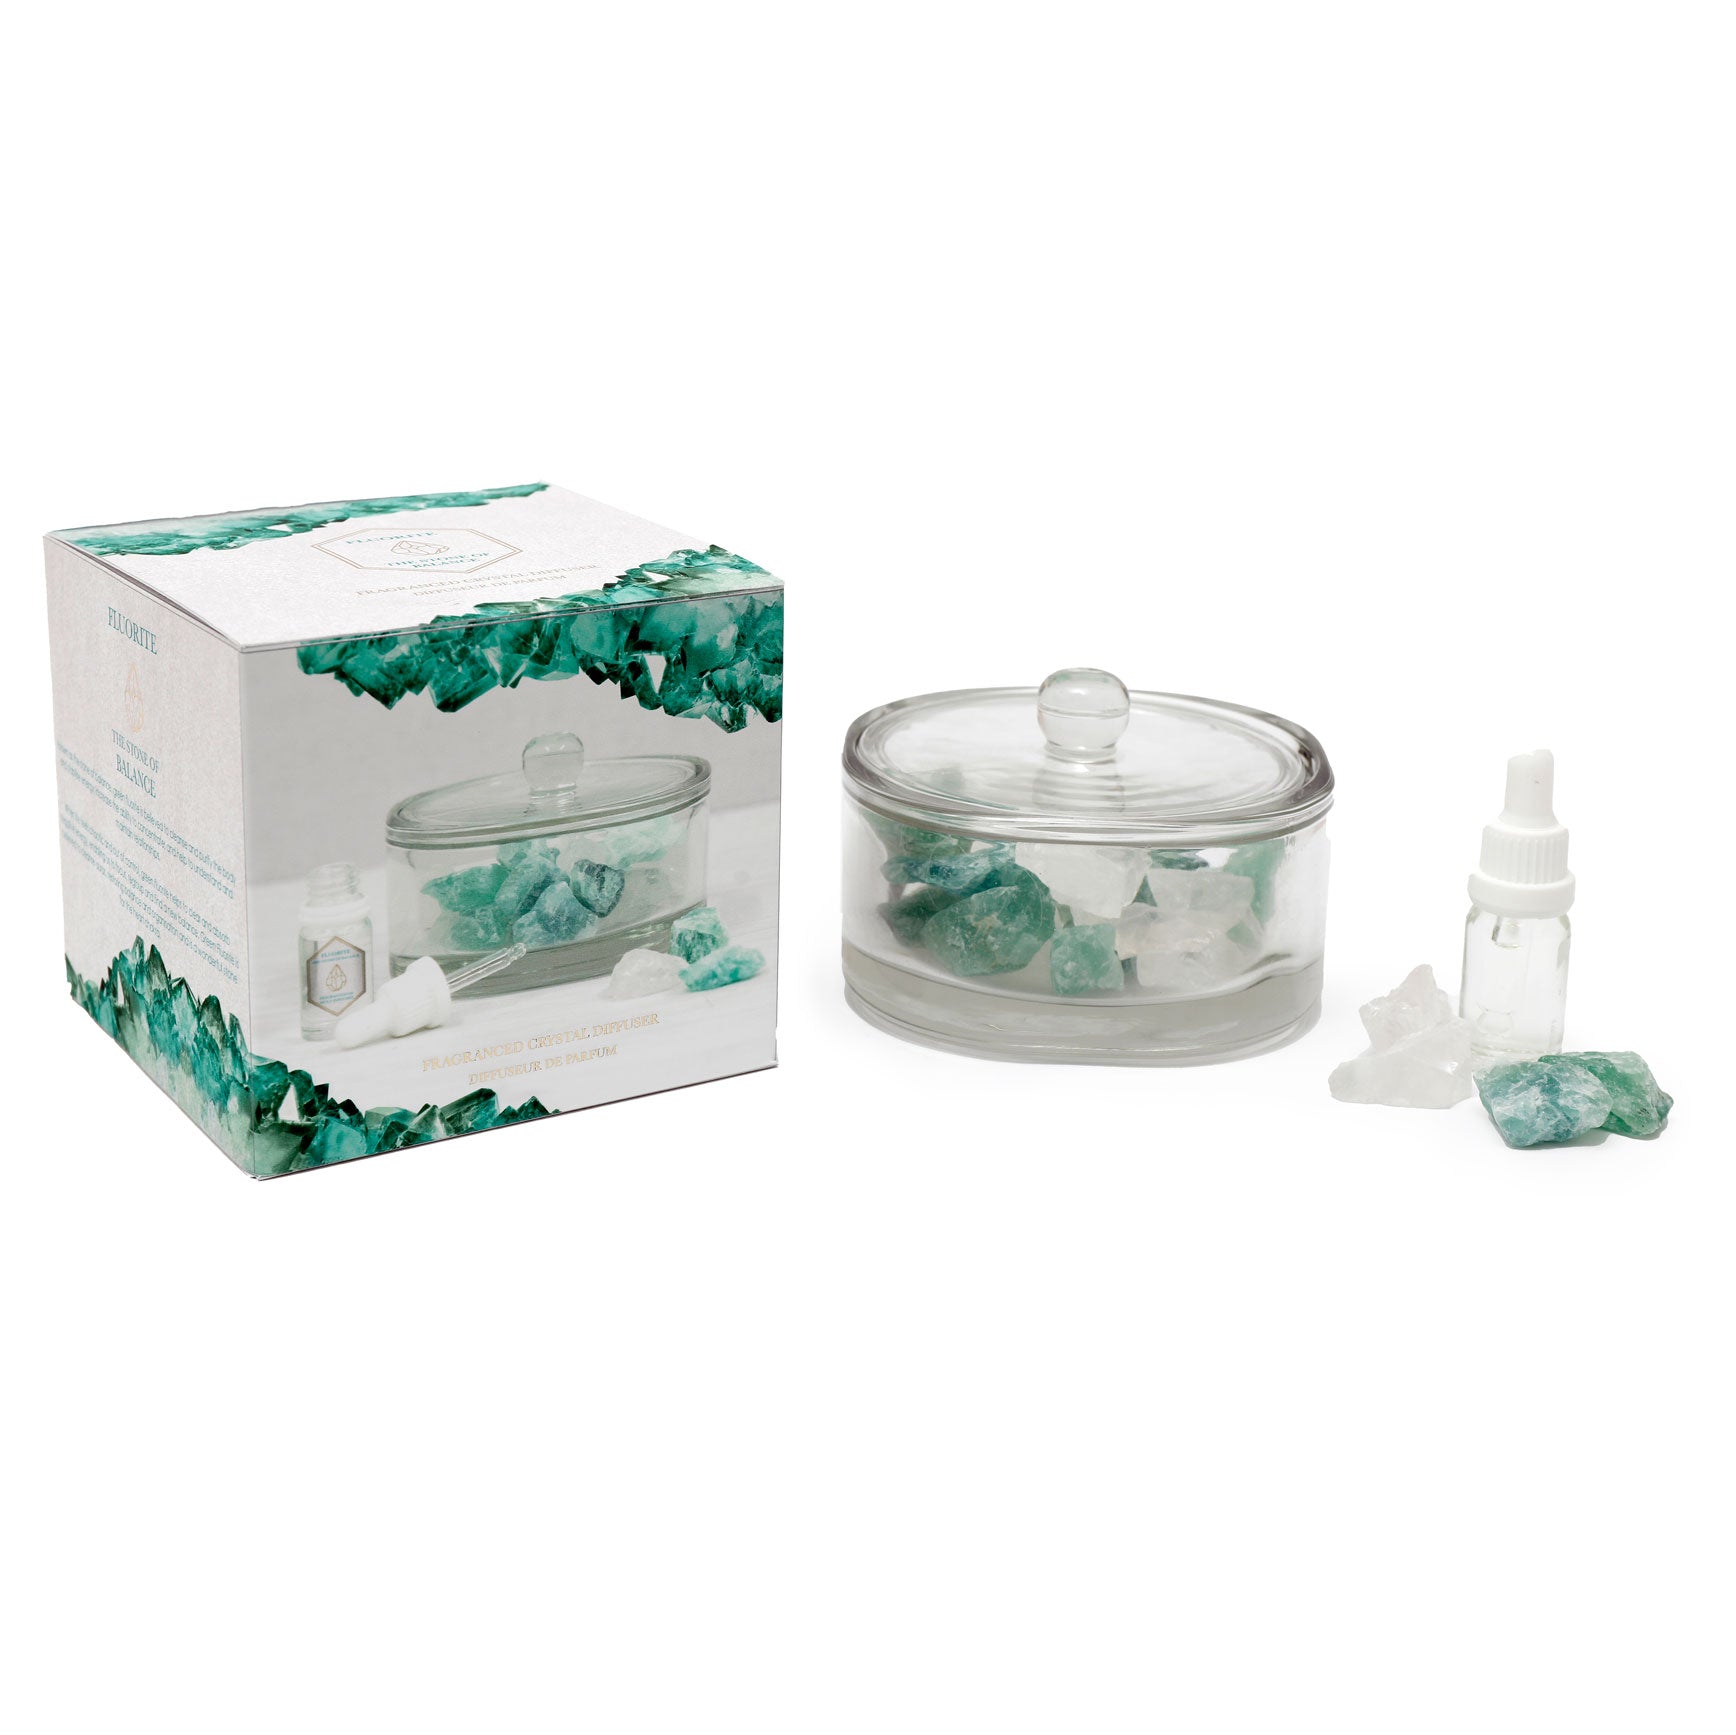 View 400g Green Fluorite Crystal Oil Diffuser information